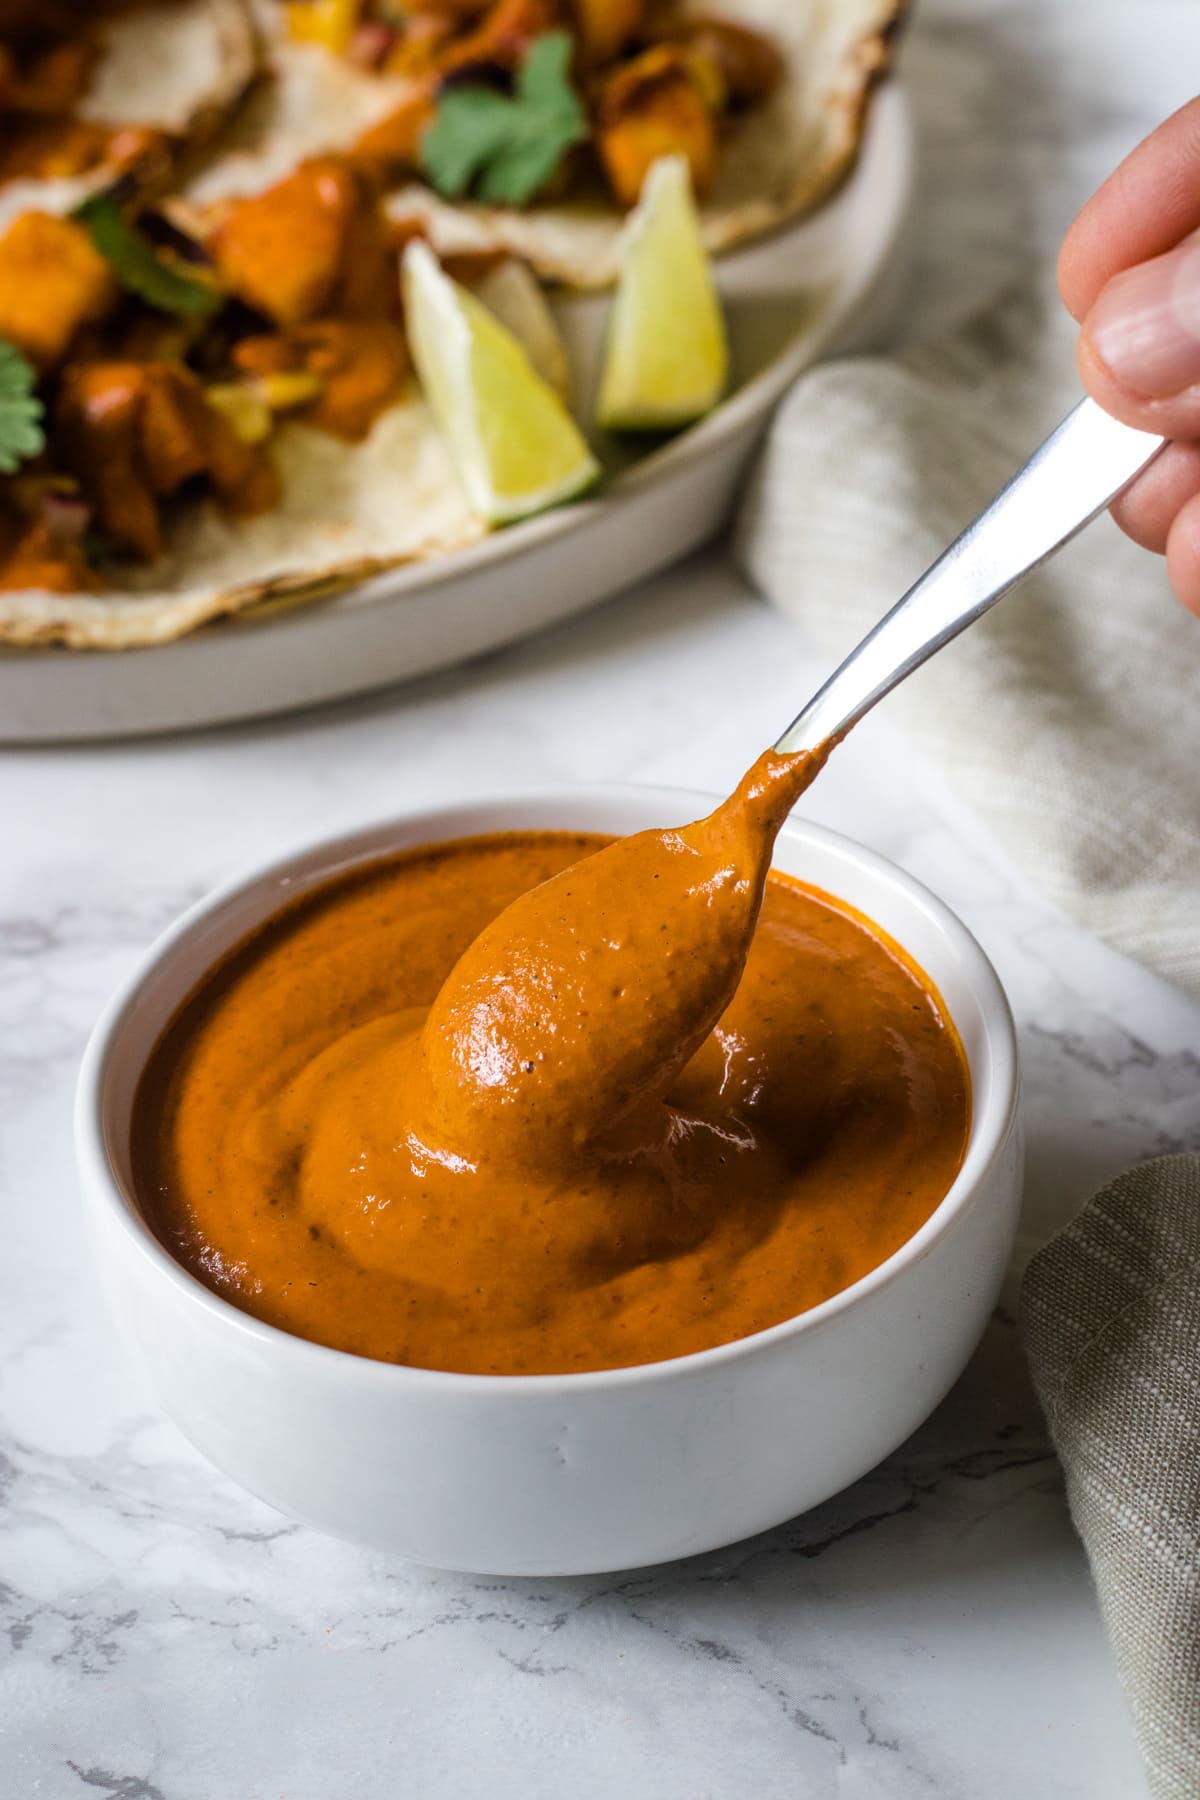 Chipotle Sauce 25 Minutes Only - Spice Up The Curry